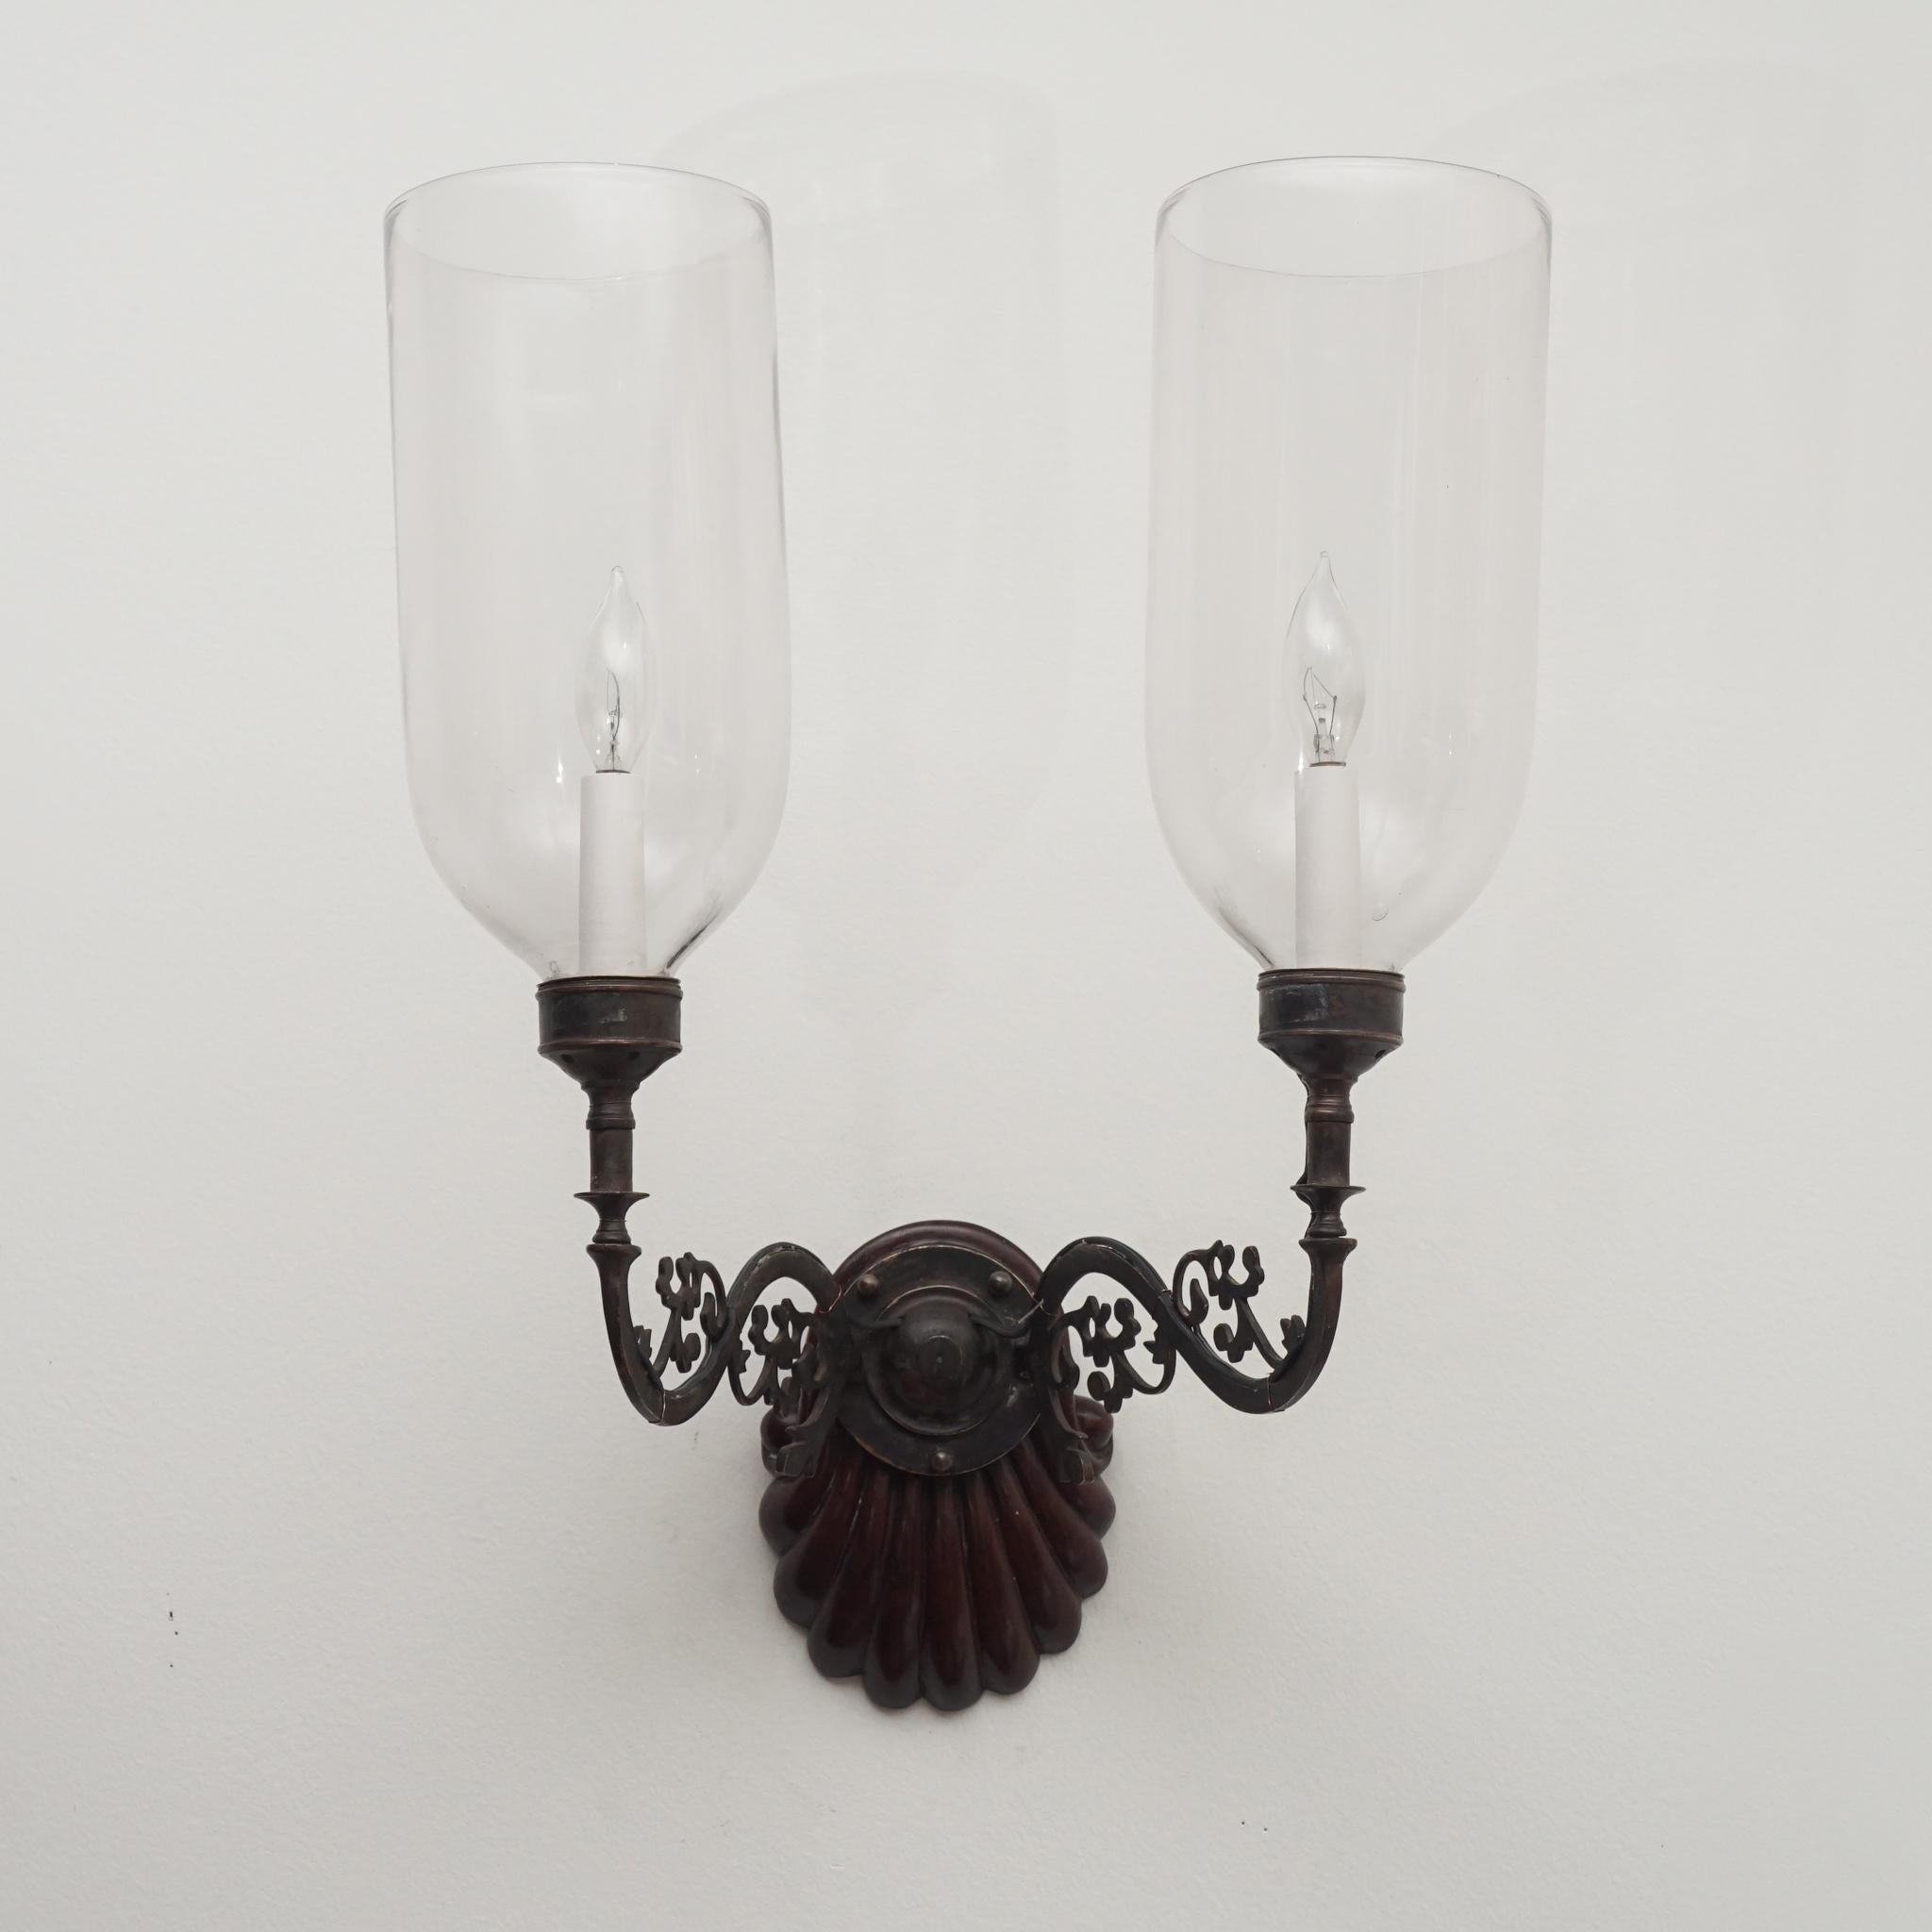 The antique carved rosewood wall sconce (one of two), shown here, is the perfect reflection of 19th century elegance. Featuring a shell carved rosewood wall mount, the sconce is enhanced with ornate metal work supporting two candle lights with clear